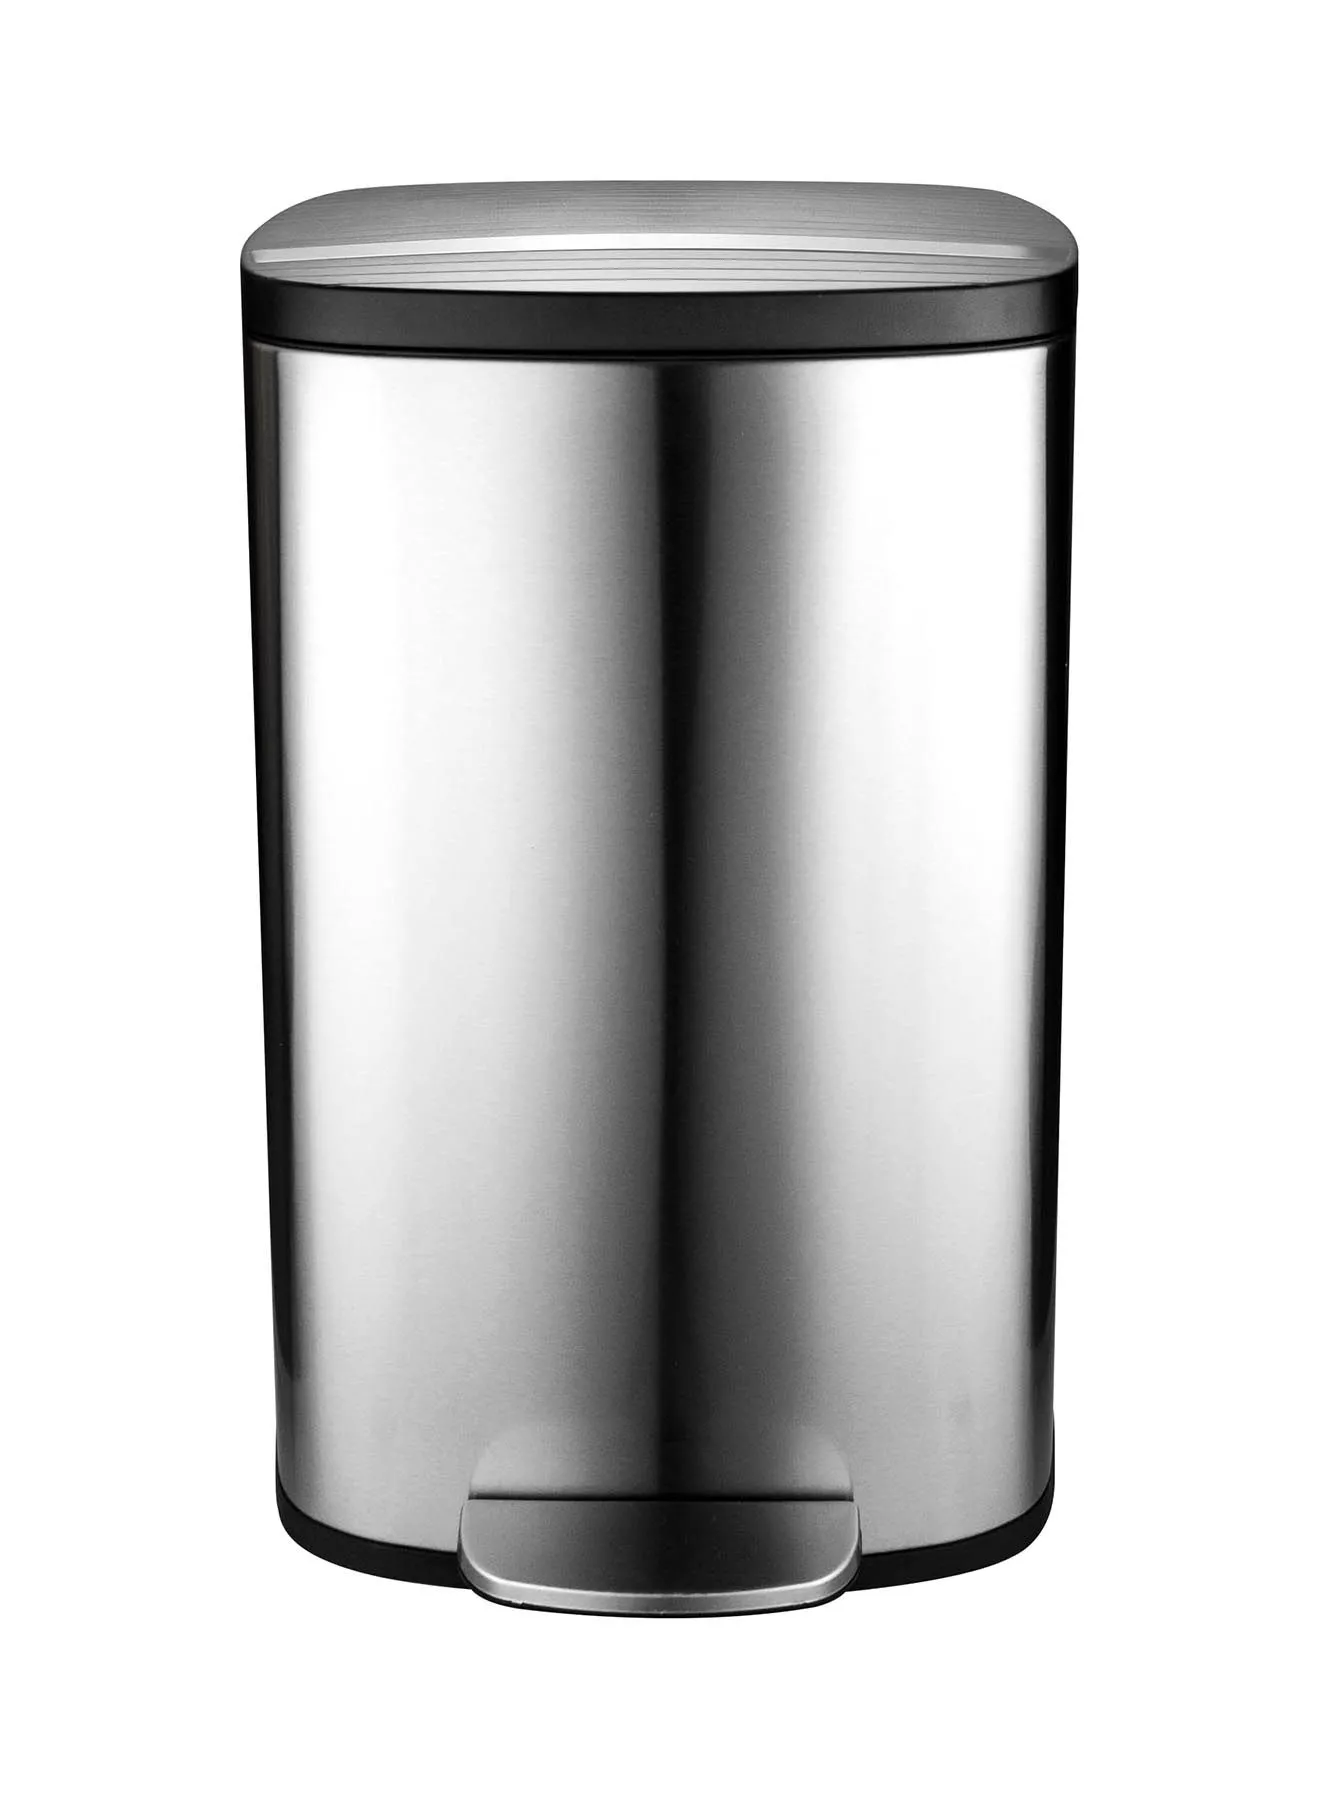 Amal Pedal Trash Bin Stainless Steel For Bathroom Kitchen And Offices Silver/Black 42.5 x 37.2 x 65.7cm